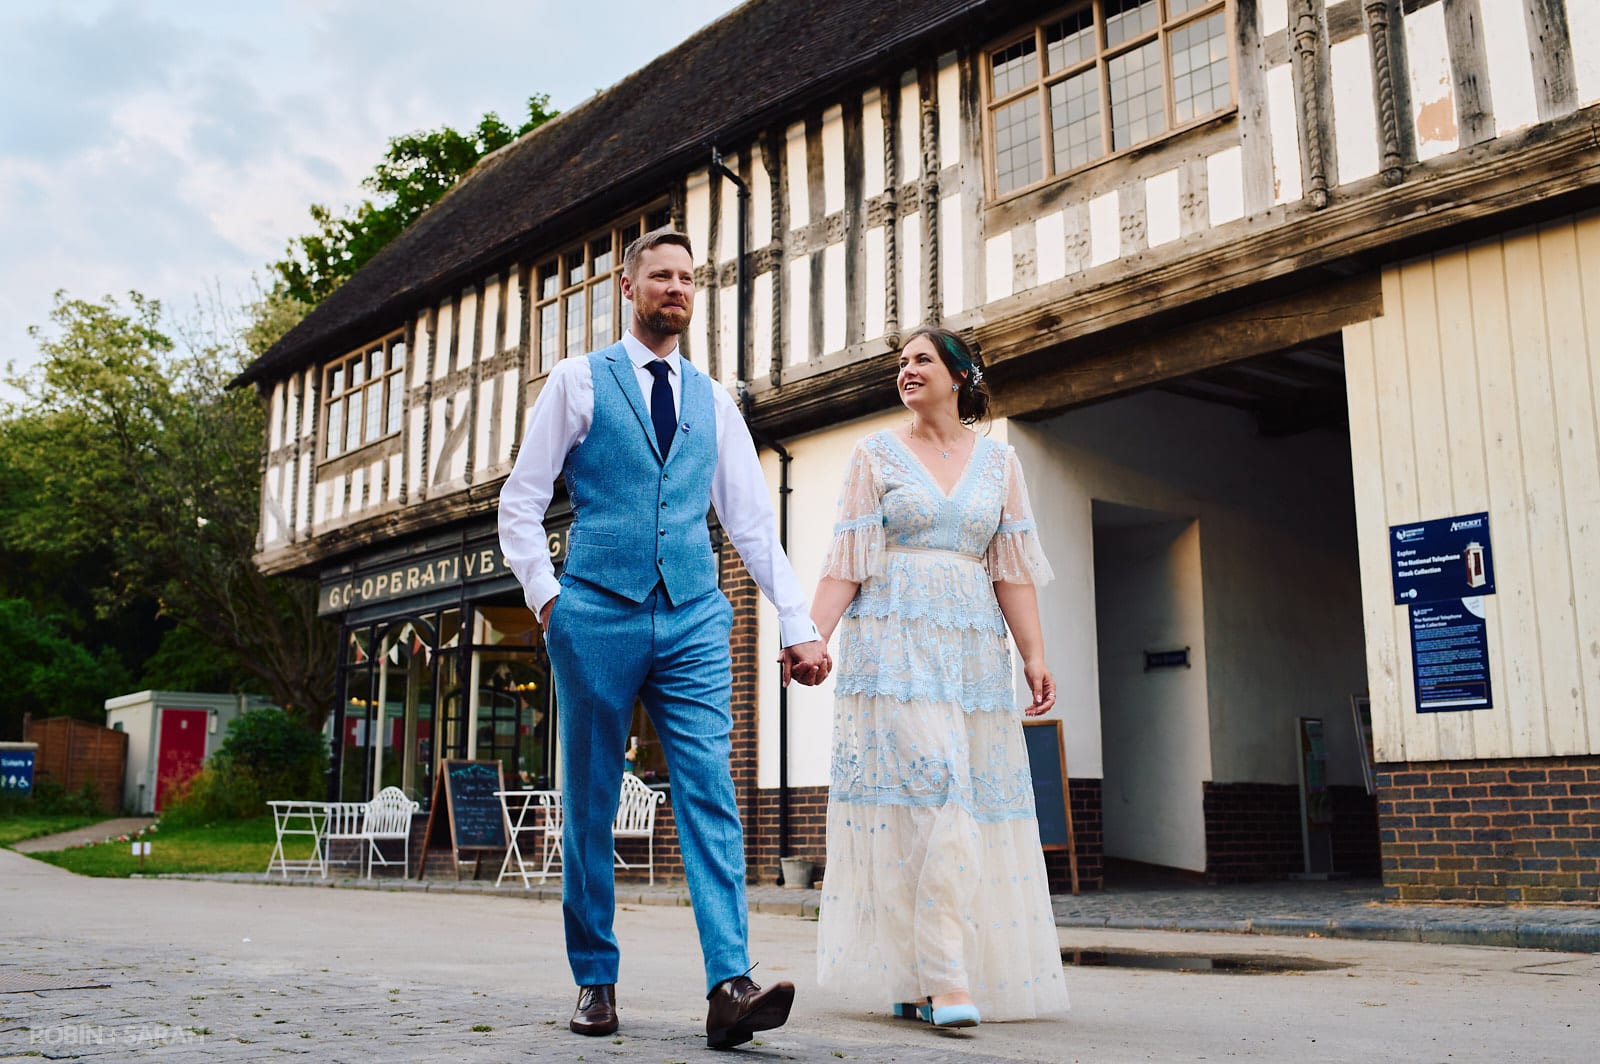 Bride in blue and white summery dress walks hand in hand with groom at Avoncroft Museum